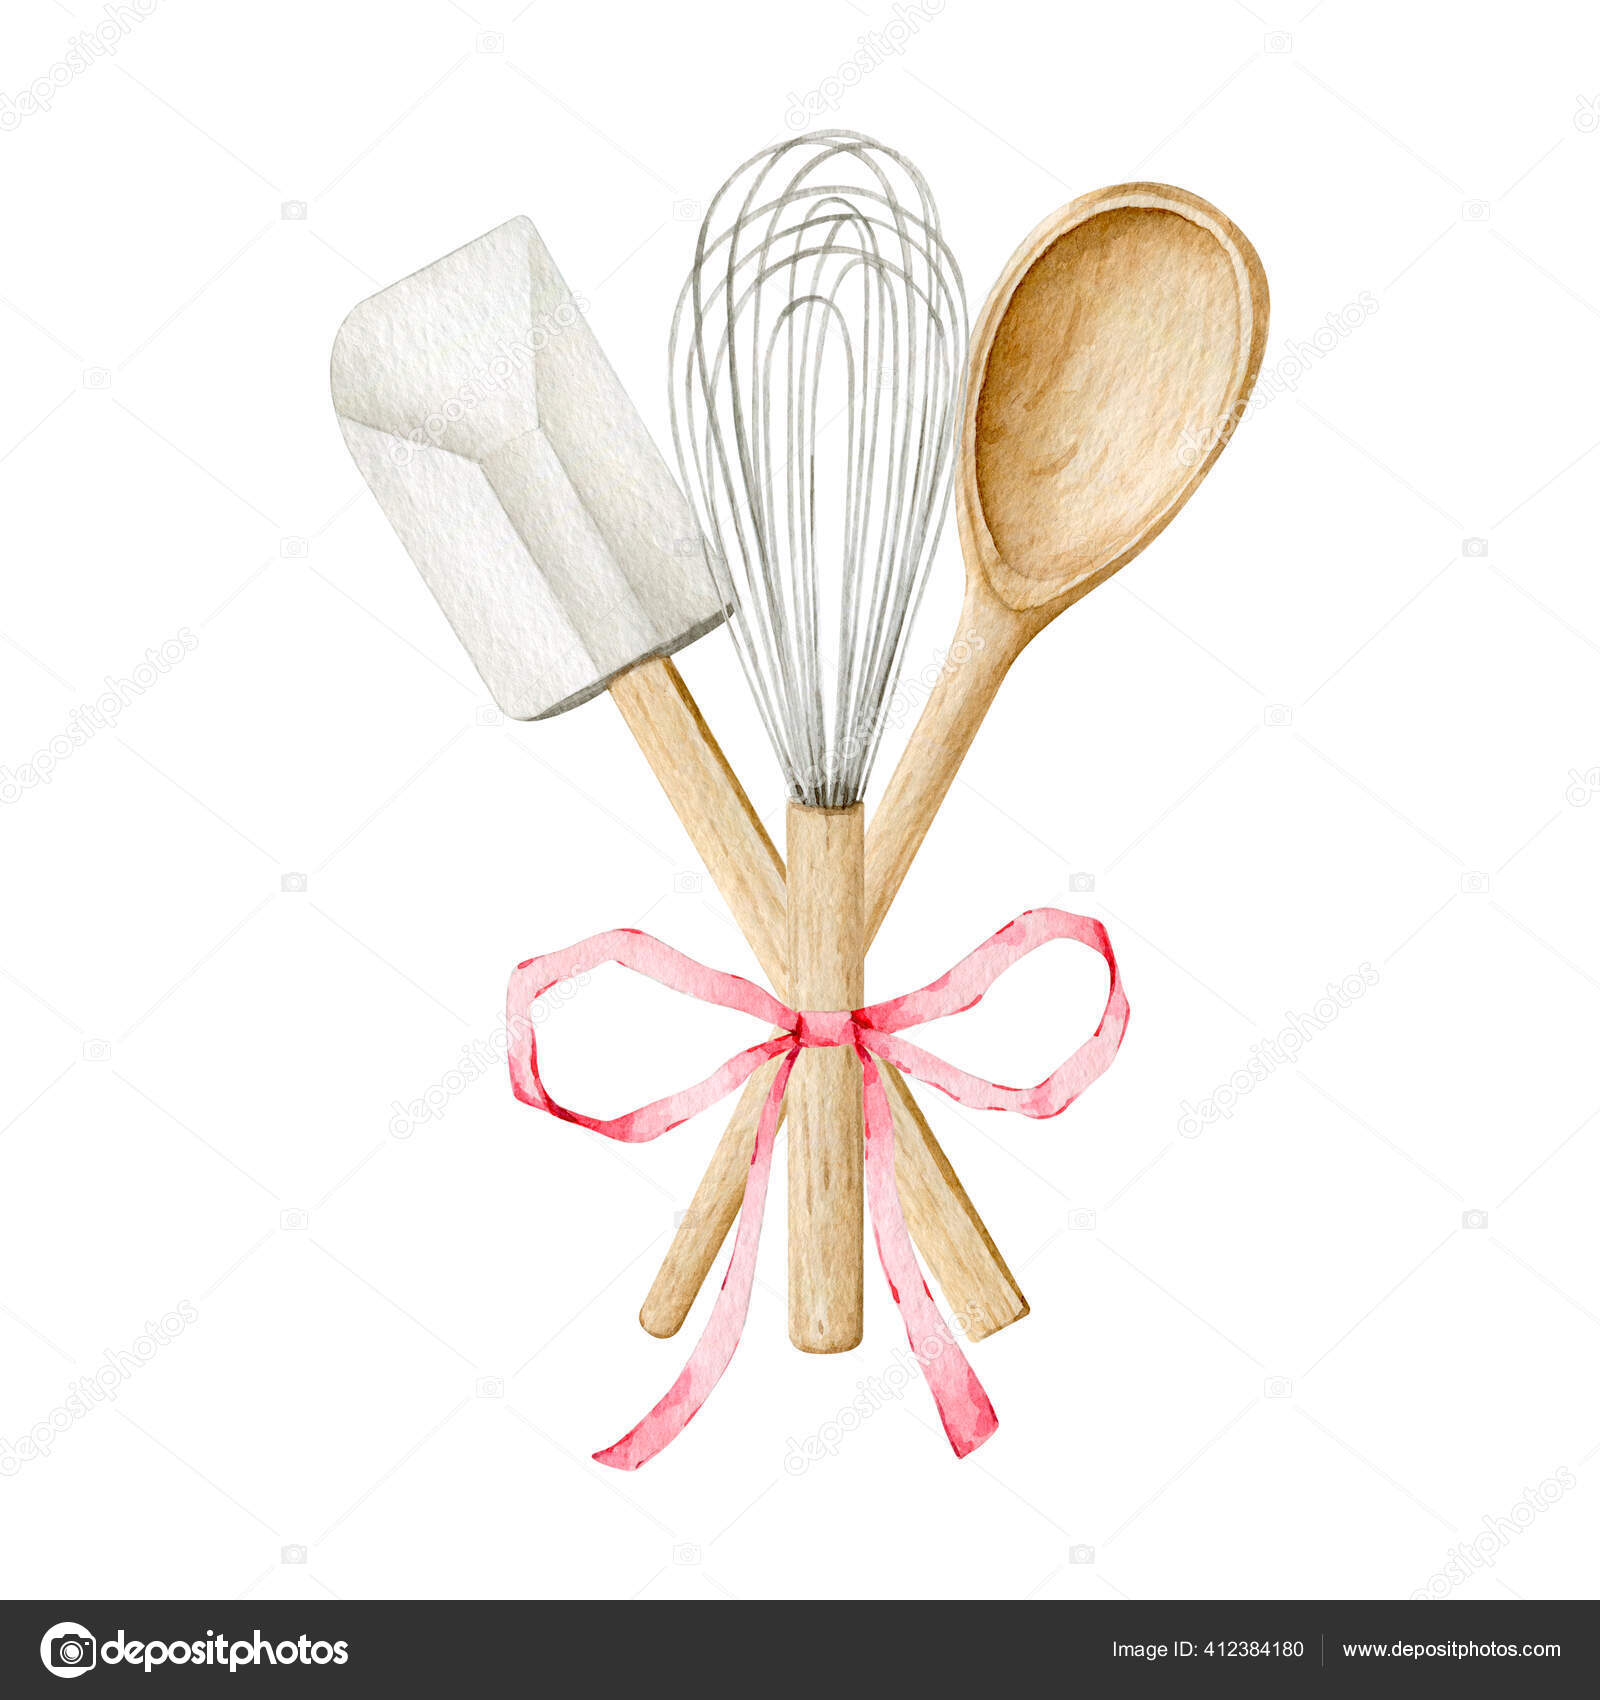 Kitchen Utensils Watercolor Clipart. Graphic by sabina.zhukovets